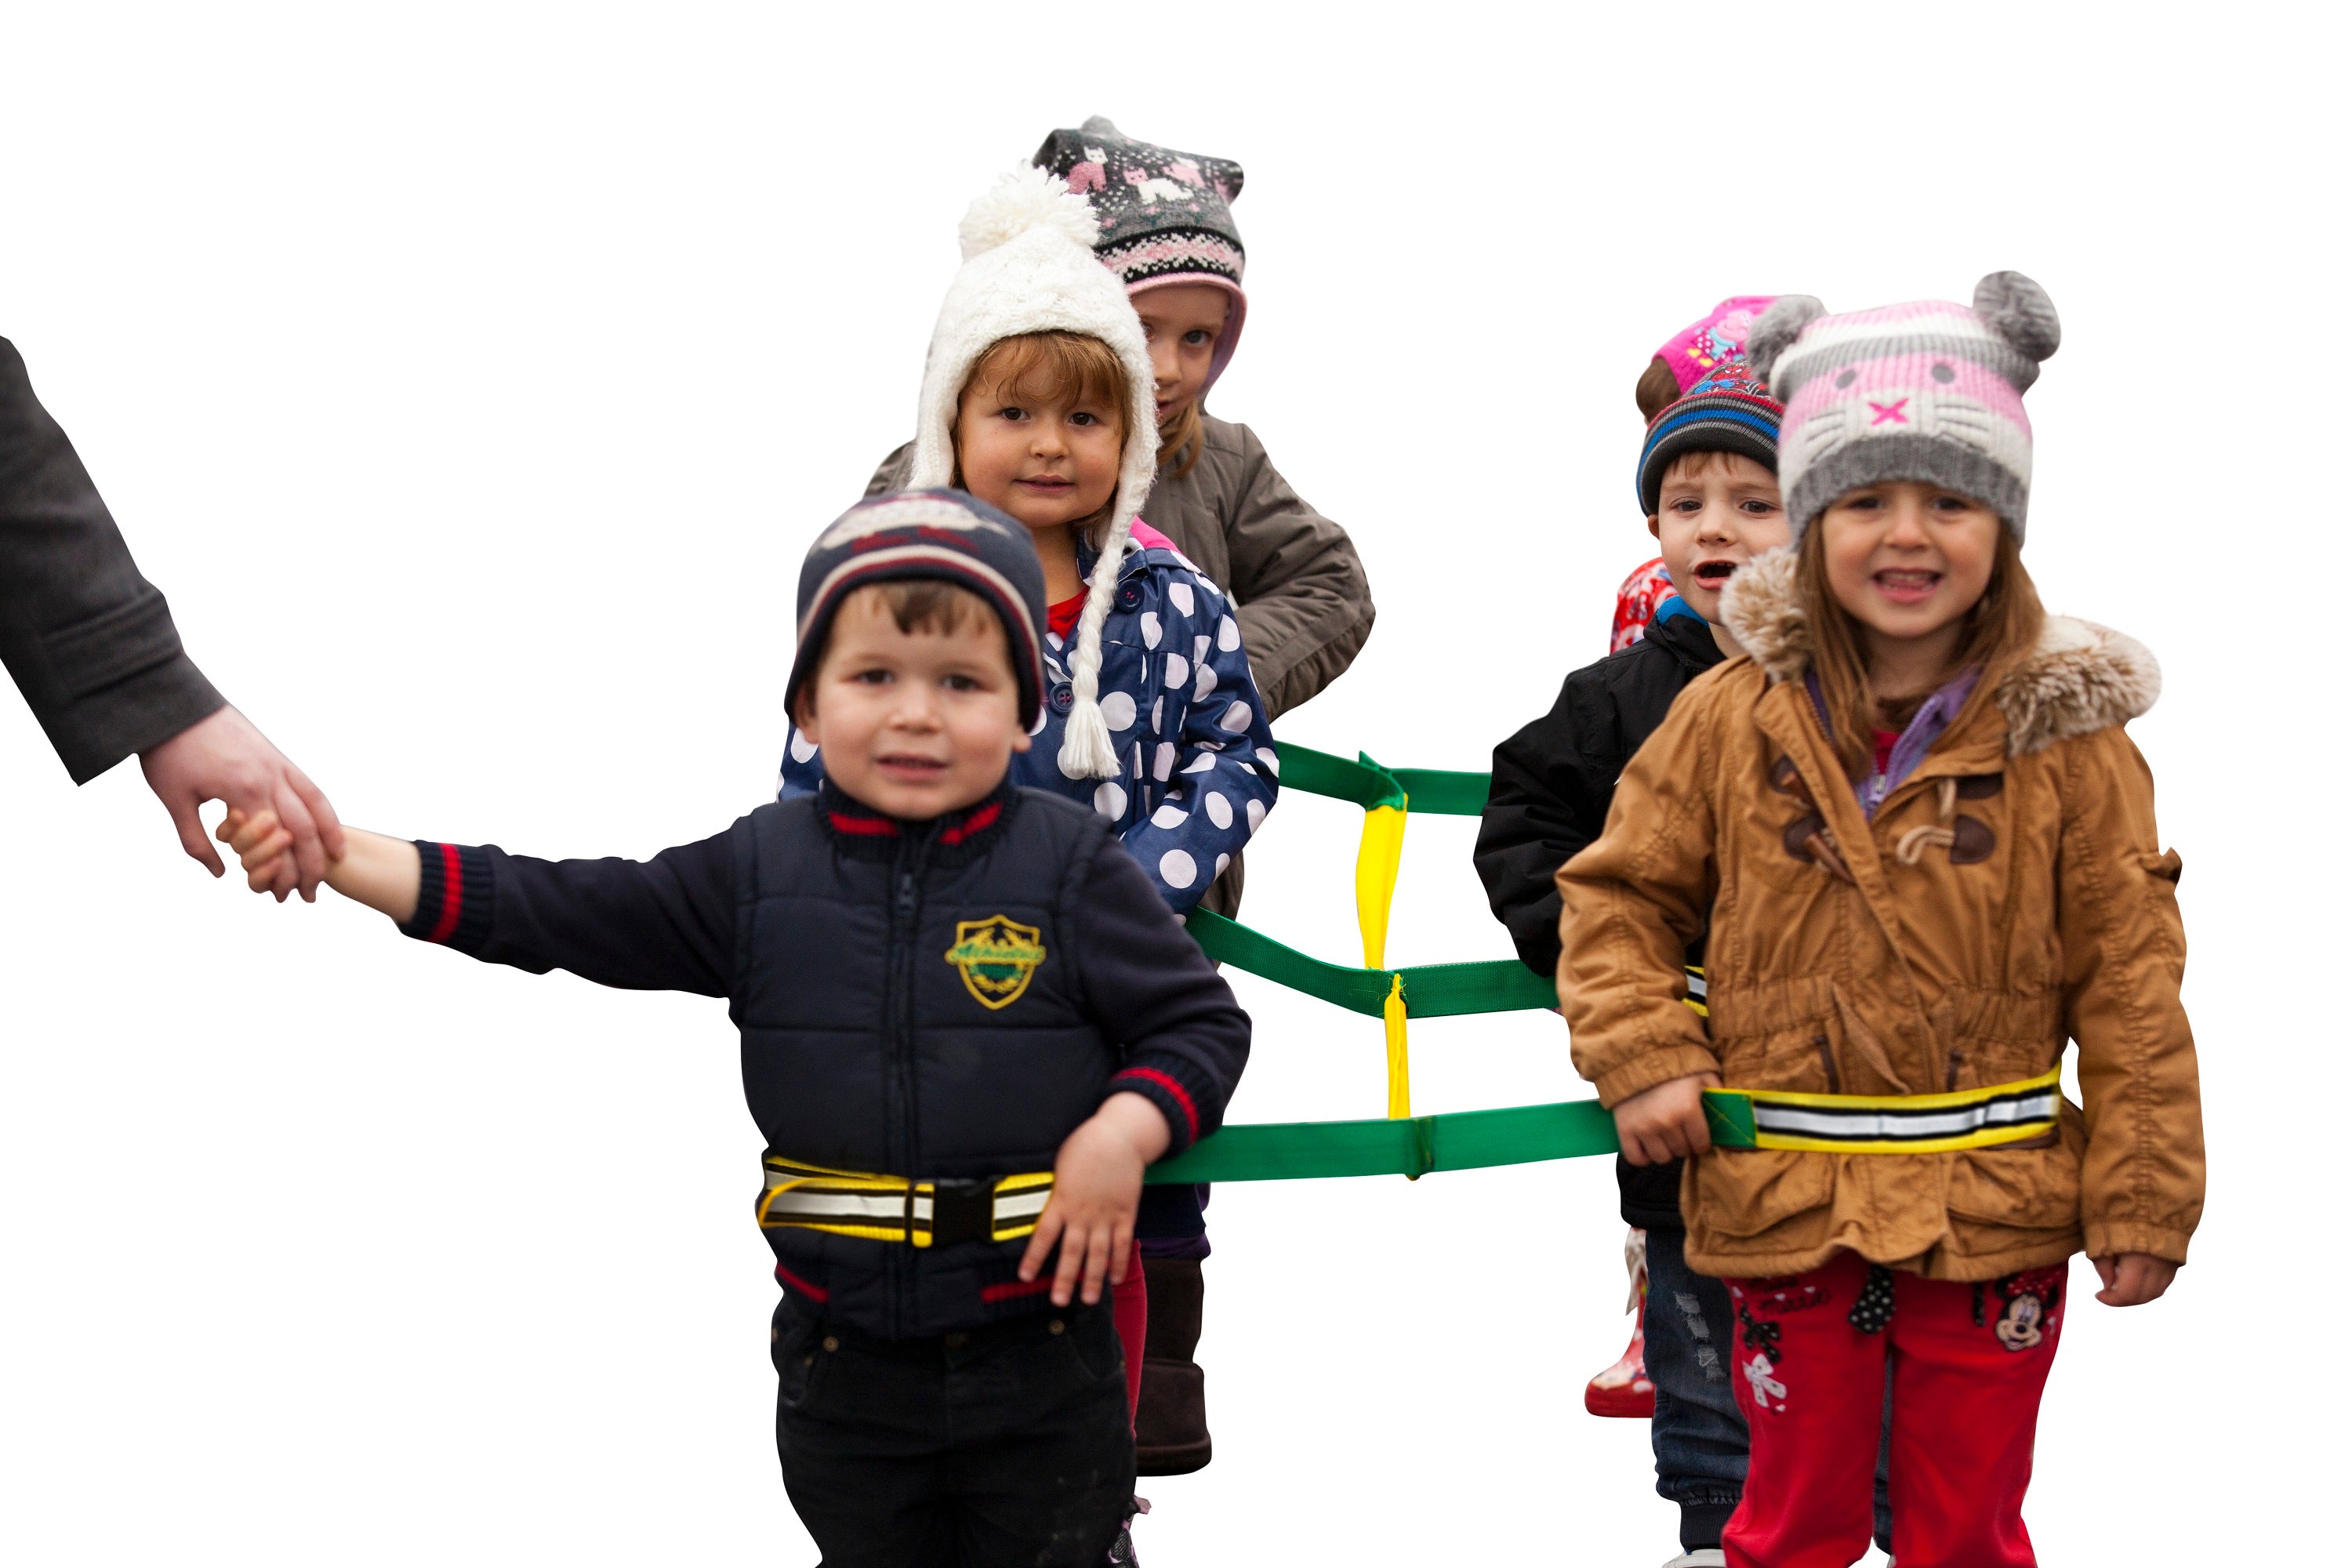 Walkodile Safety Web - the fun, safe walking rope for six children.